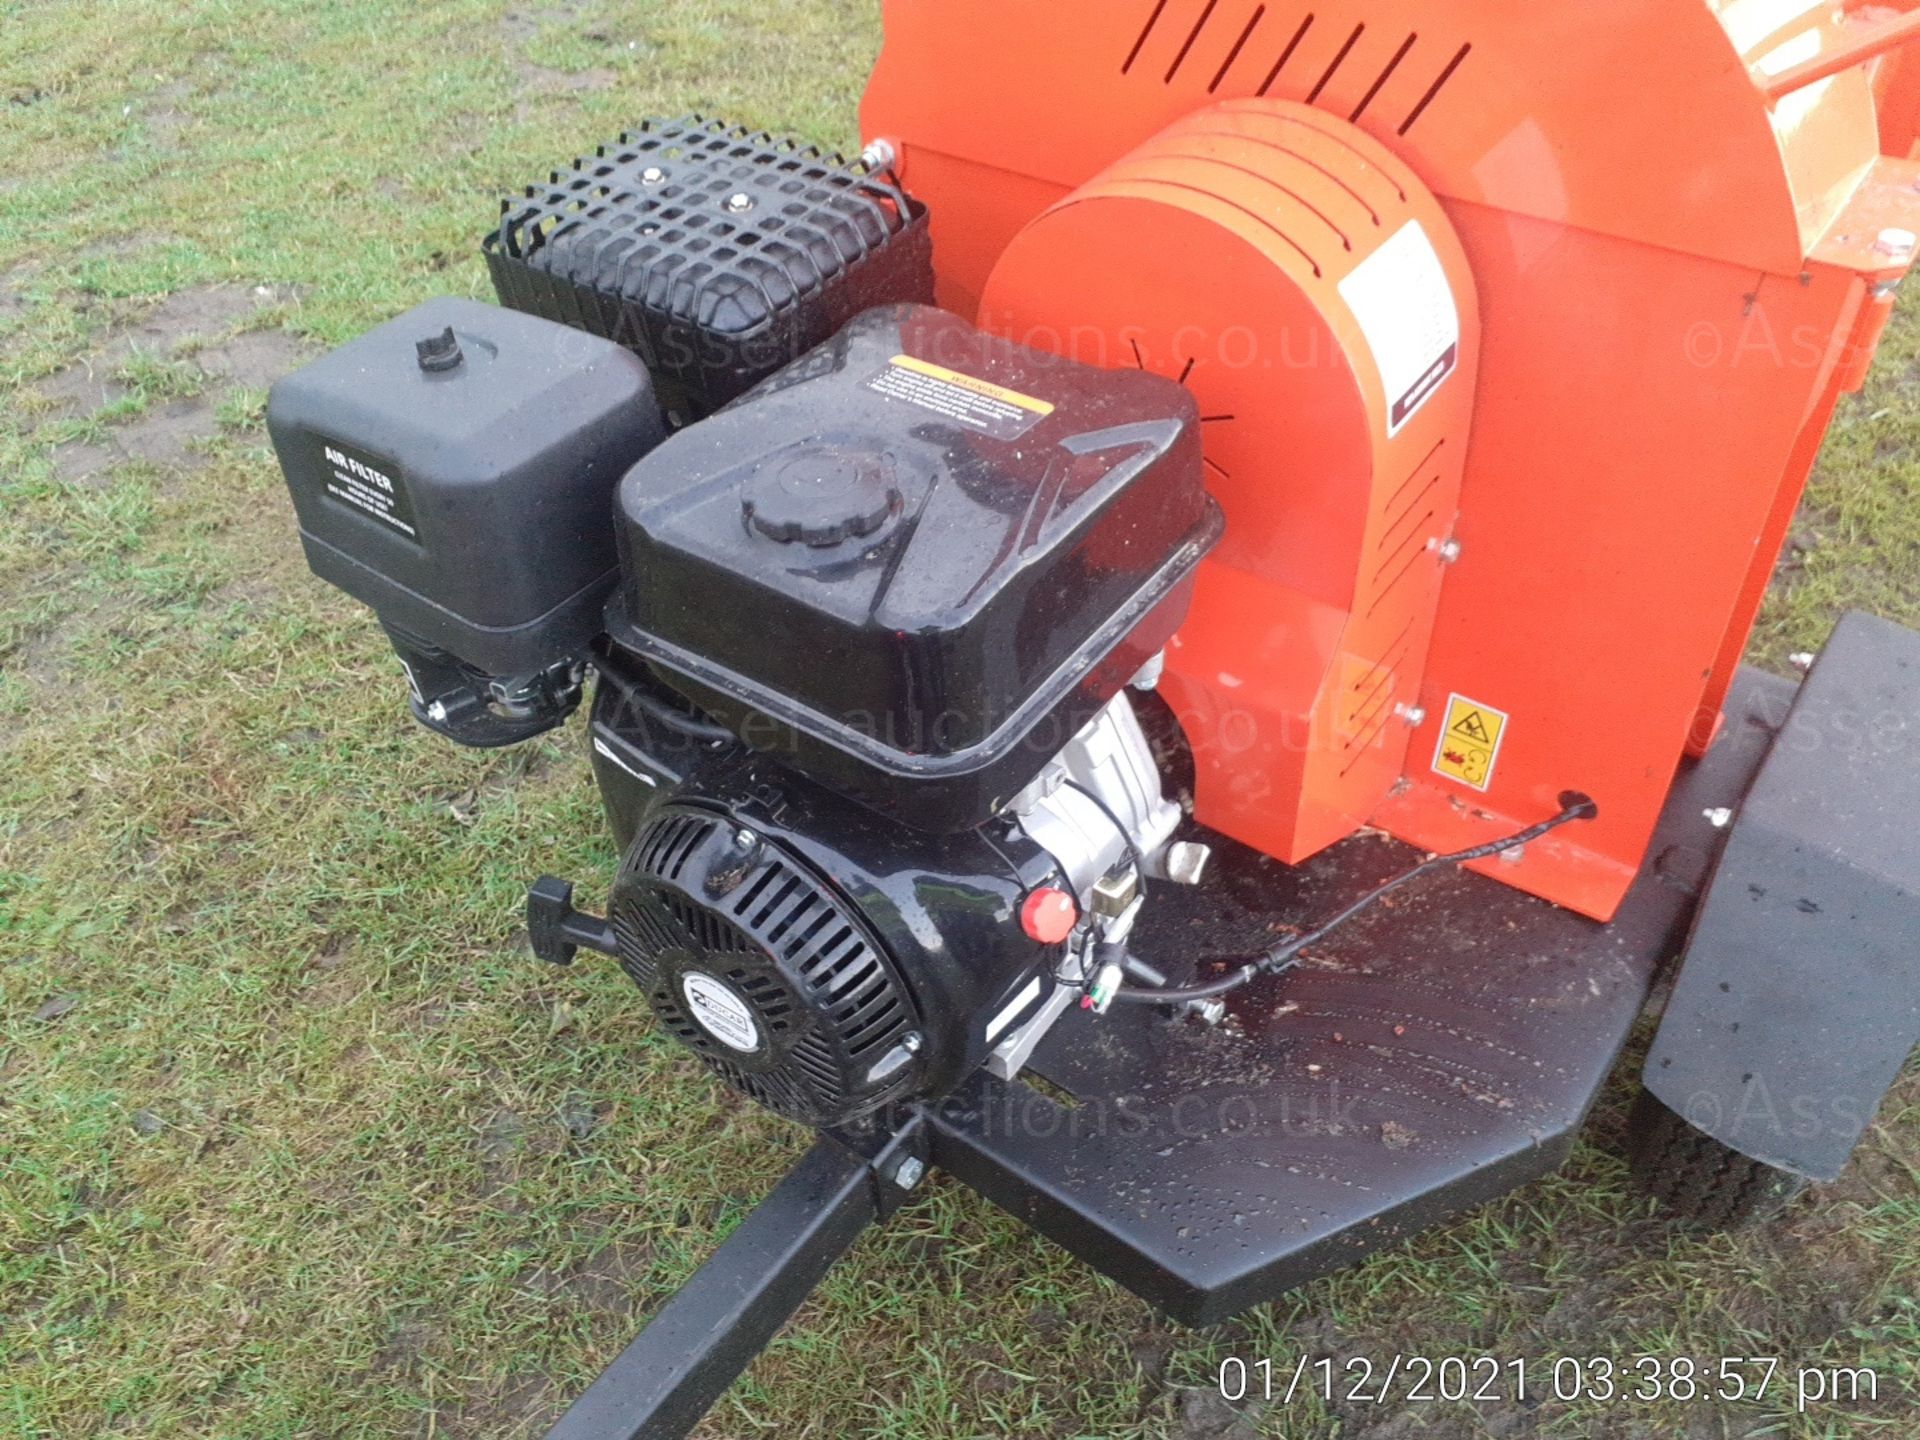 BRAND NEW AND UNUSED DGS1500 420CC 4.5” TOWABLE PETROL WOOD CHIPPER *NO VAT* - Image 5 of 11